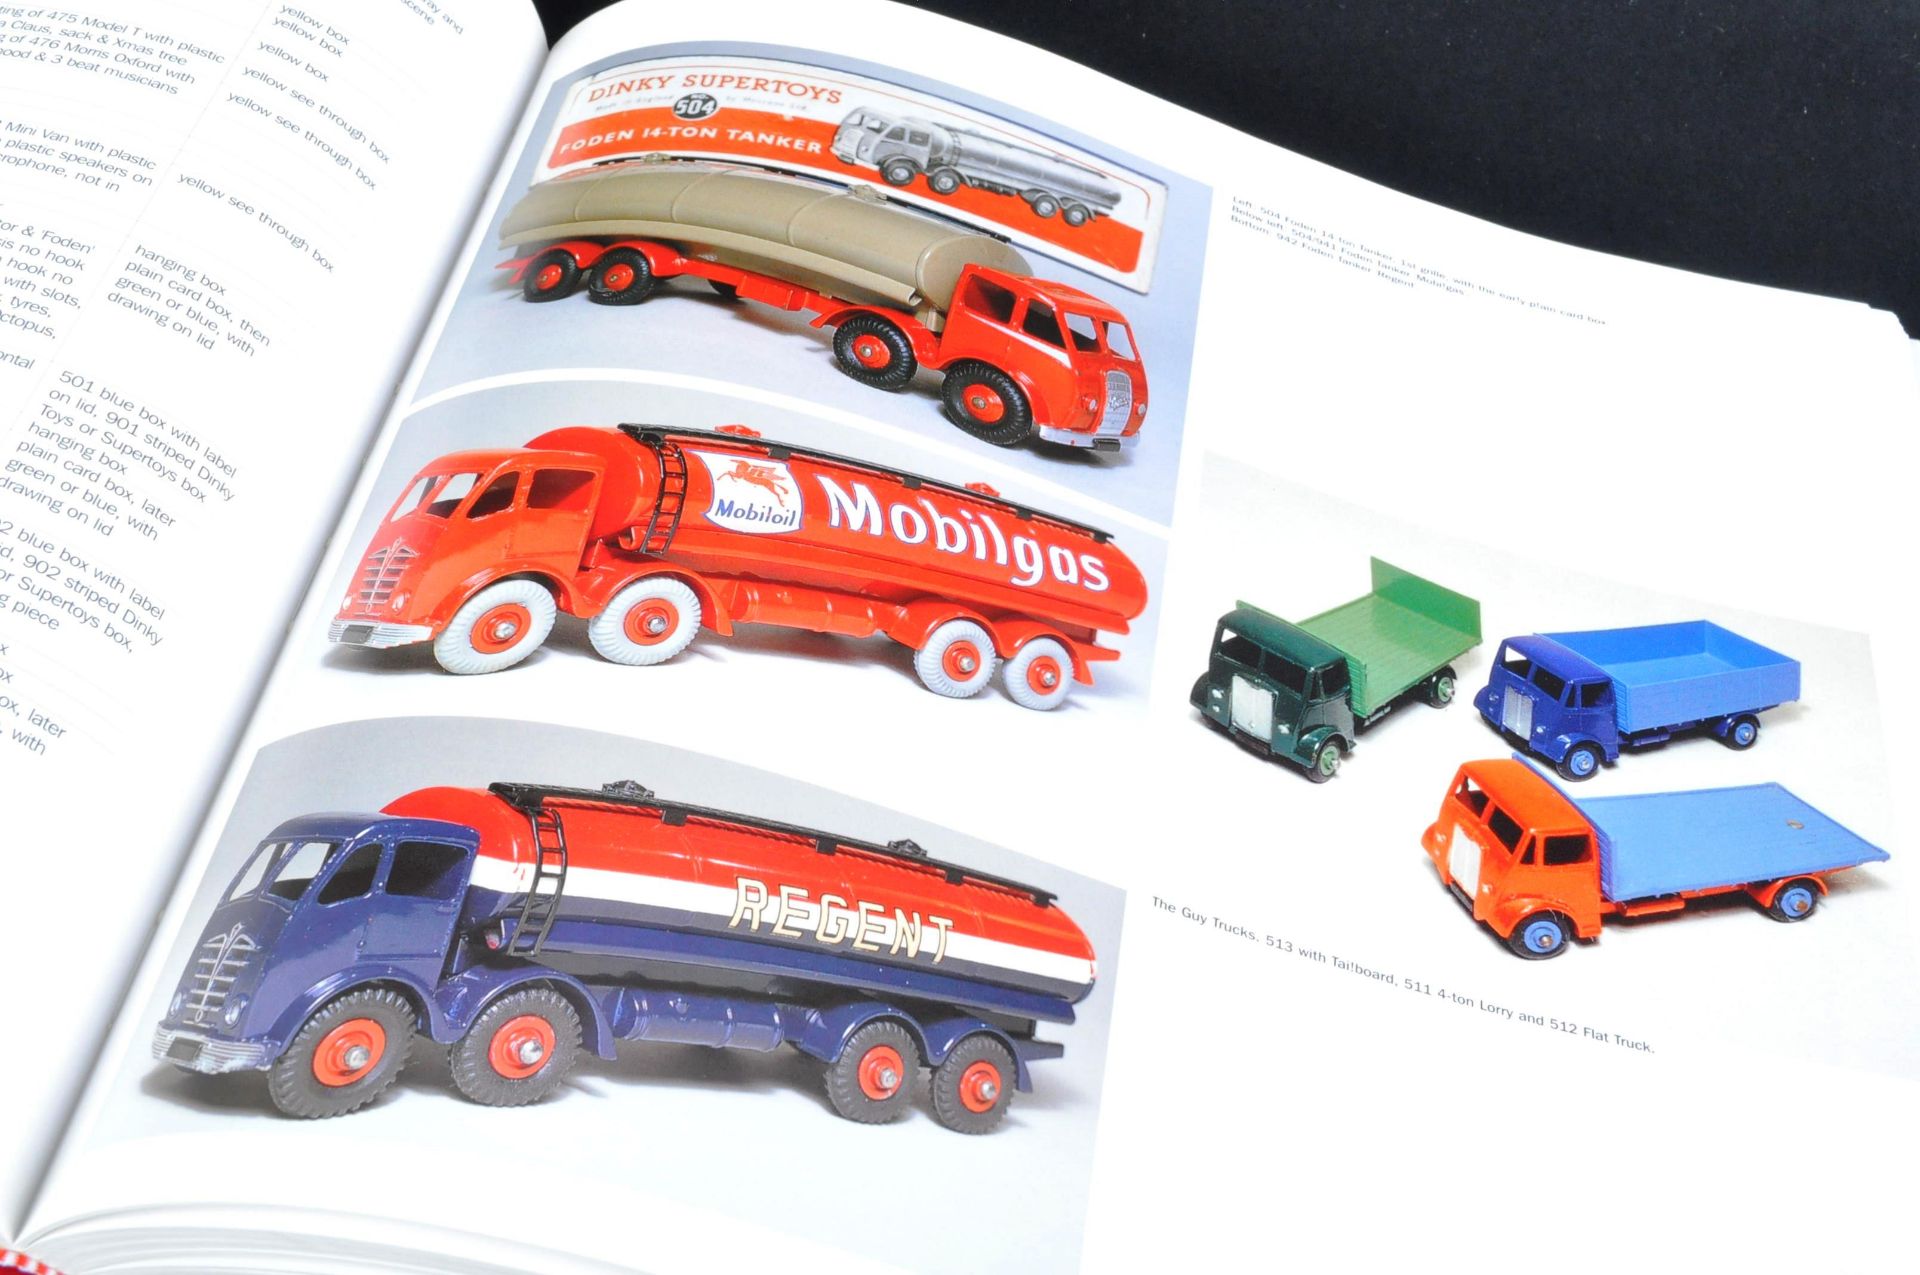 THE GREAT BOOK OF DINKY TOYS ILLUSTRATED REFERENCE BOOK - Image 5 of 8